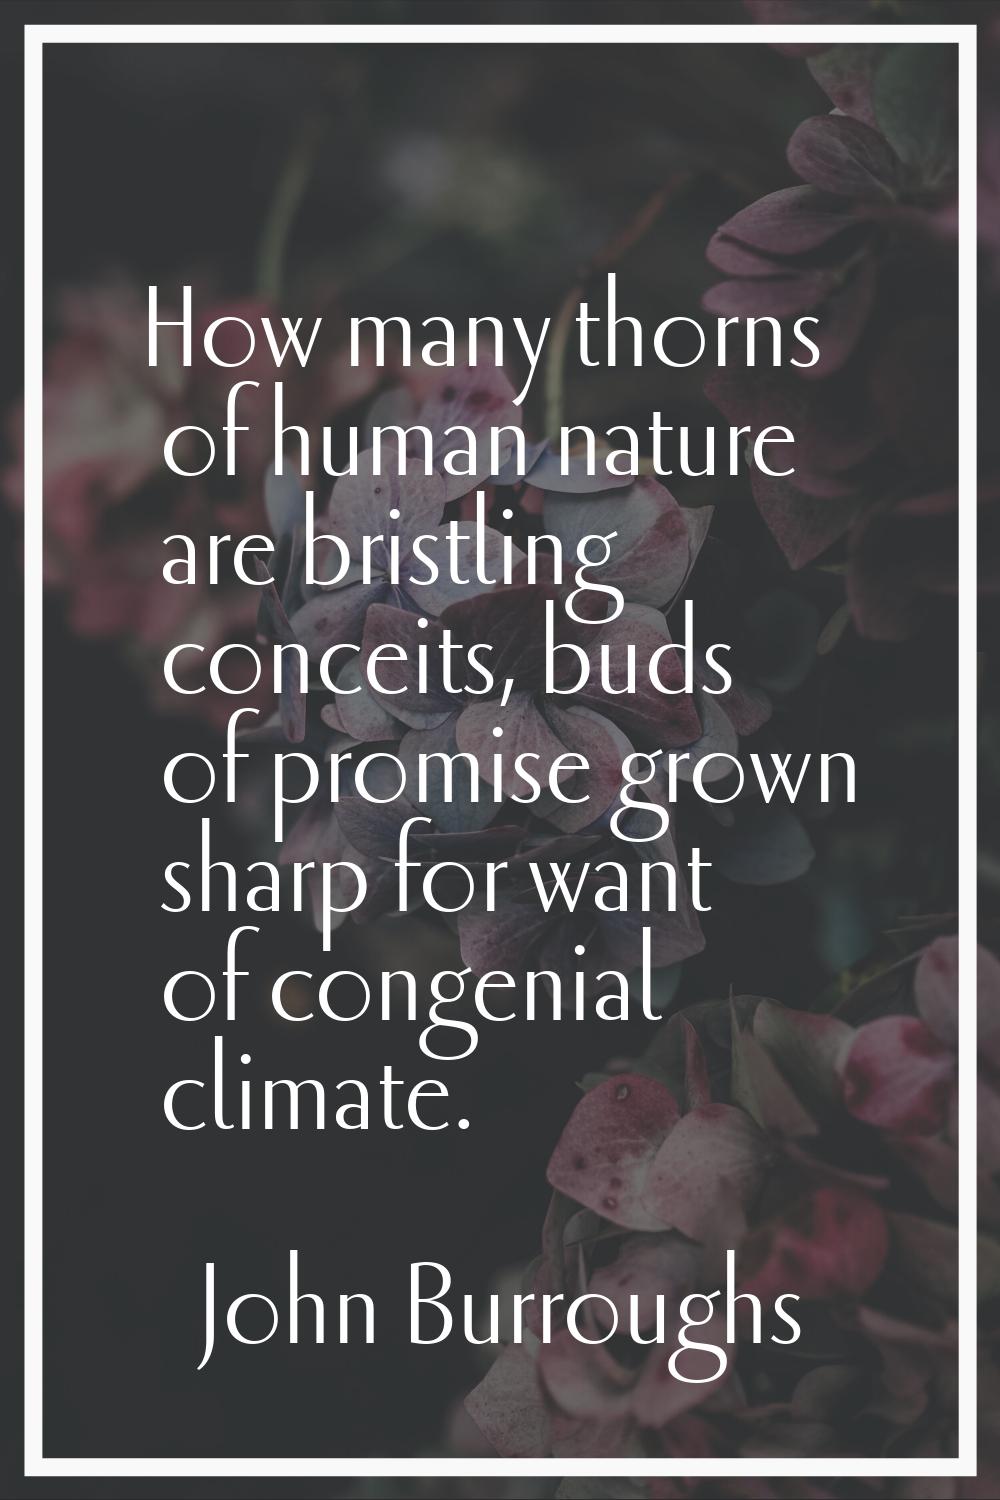 How many thorns of human nature are bristling conceits, buds of promise grown sharp for want of con